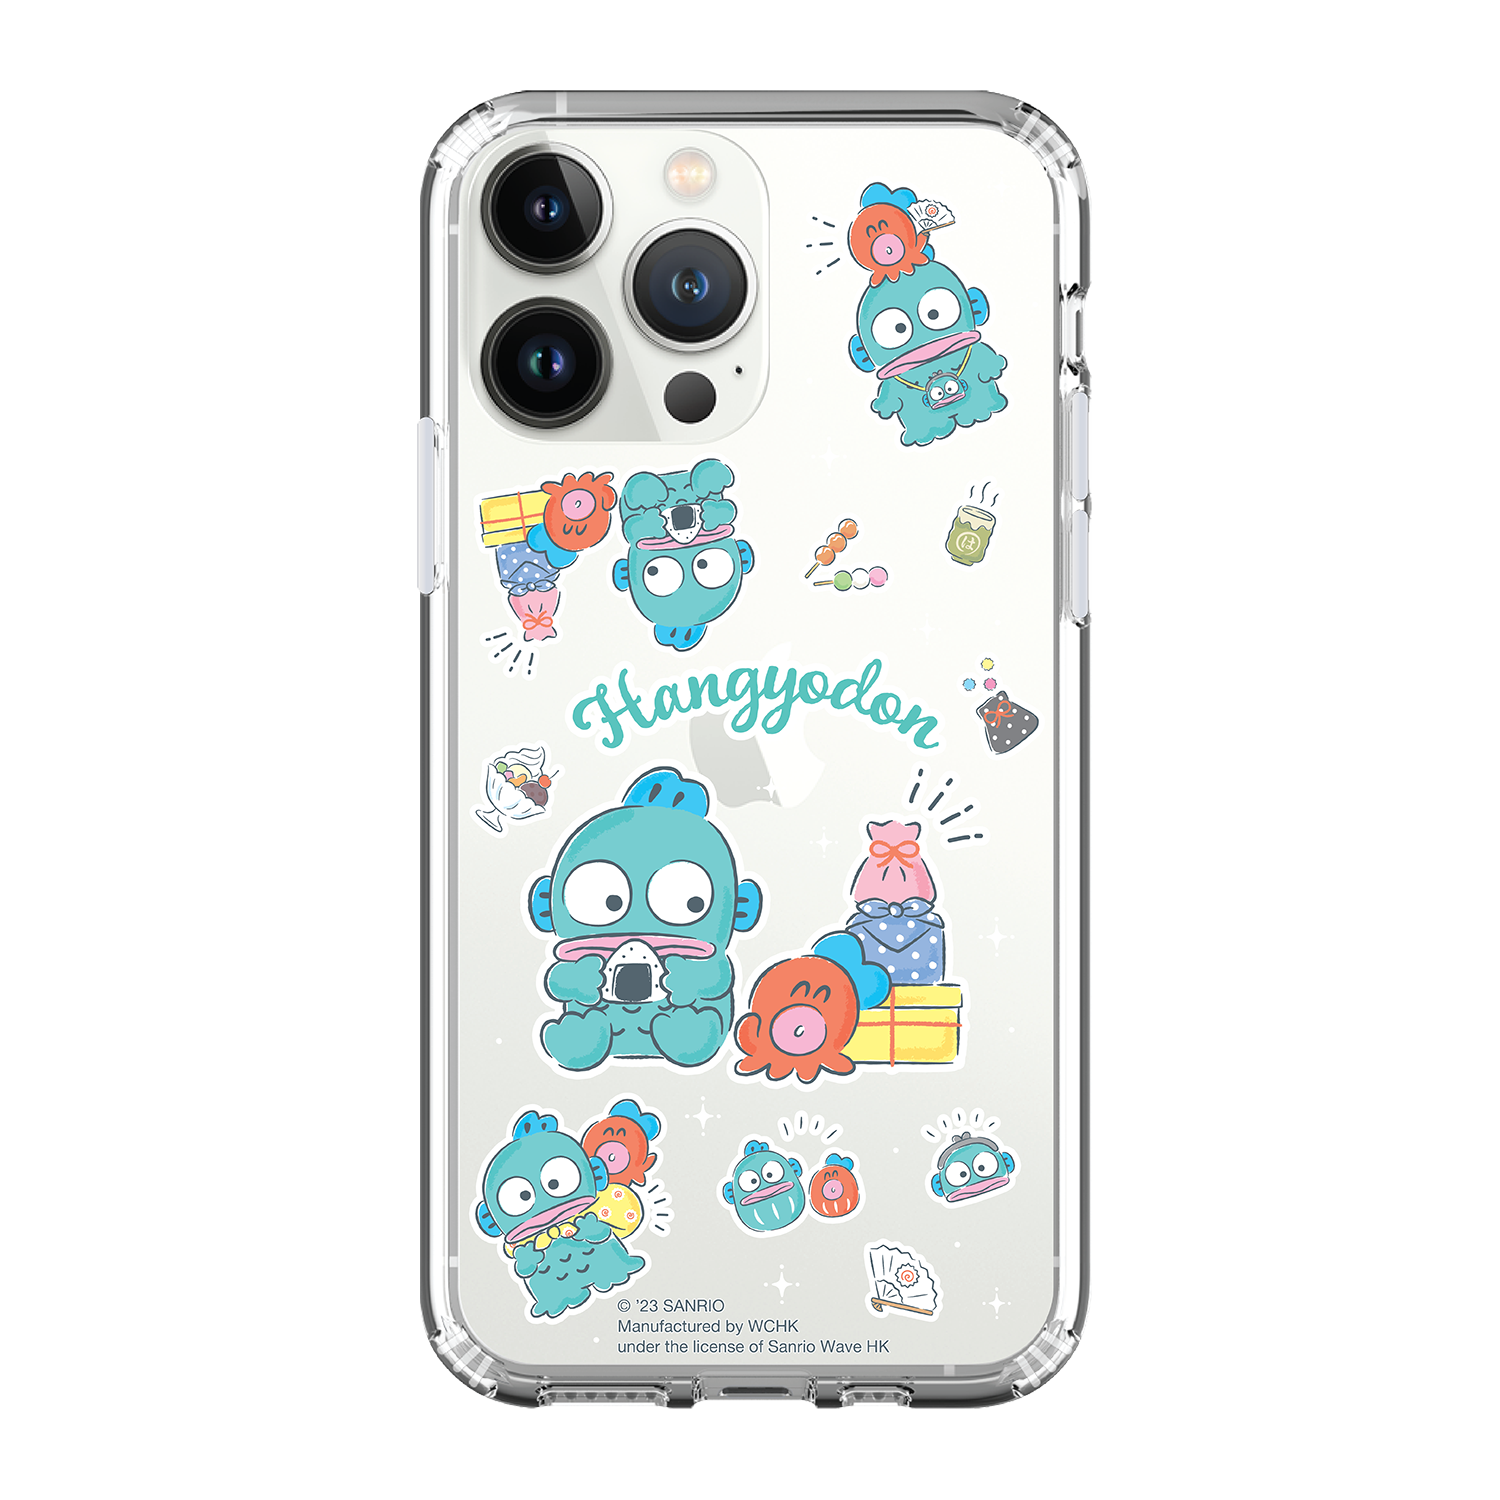 Han-GyoDon Clear Case / iPhone Case / Android Case / Samsung Case 防撞透明手機殼 (HG99)